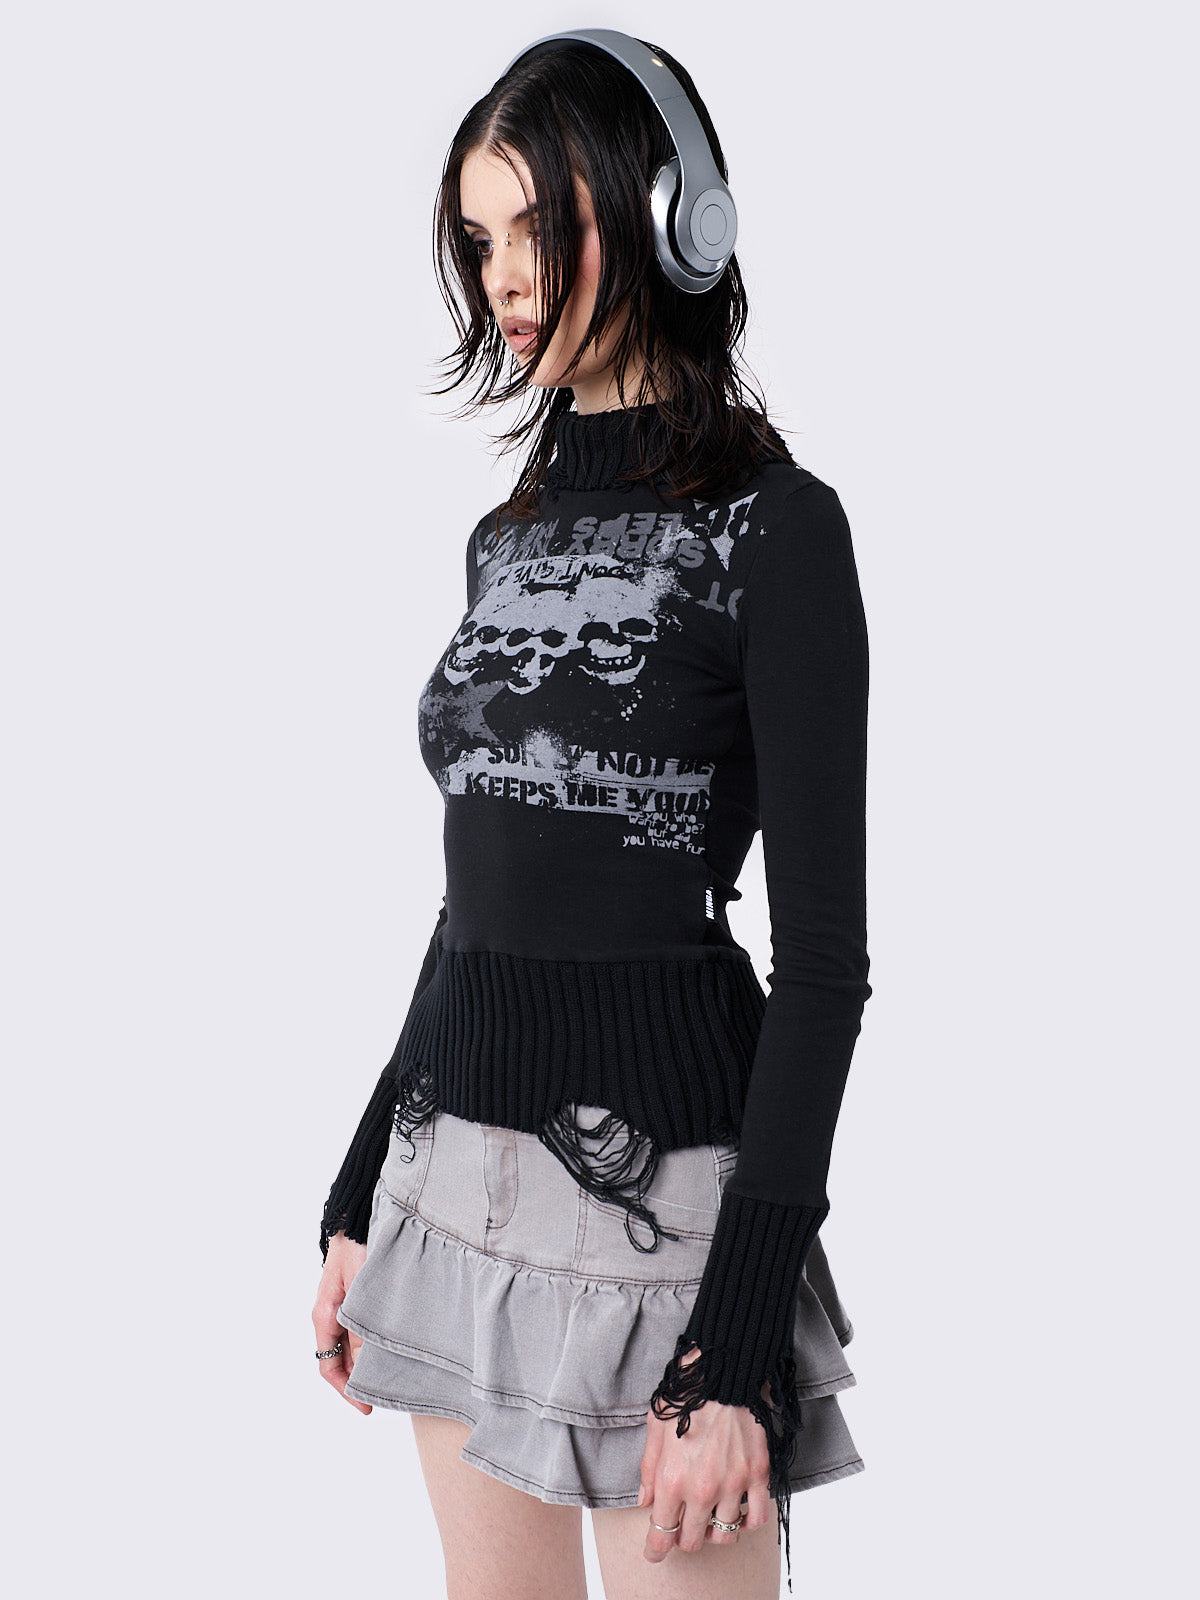 Black Distressed High Neck Top with Skulls Graphic Print